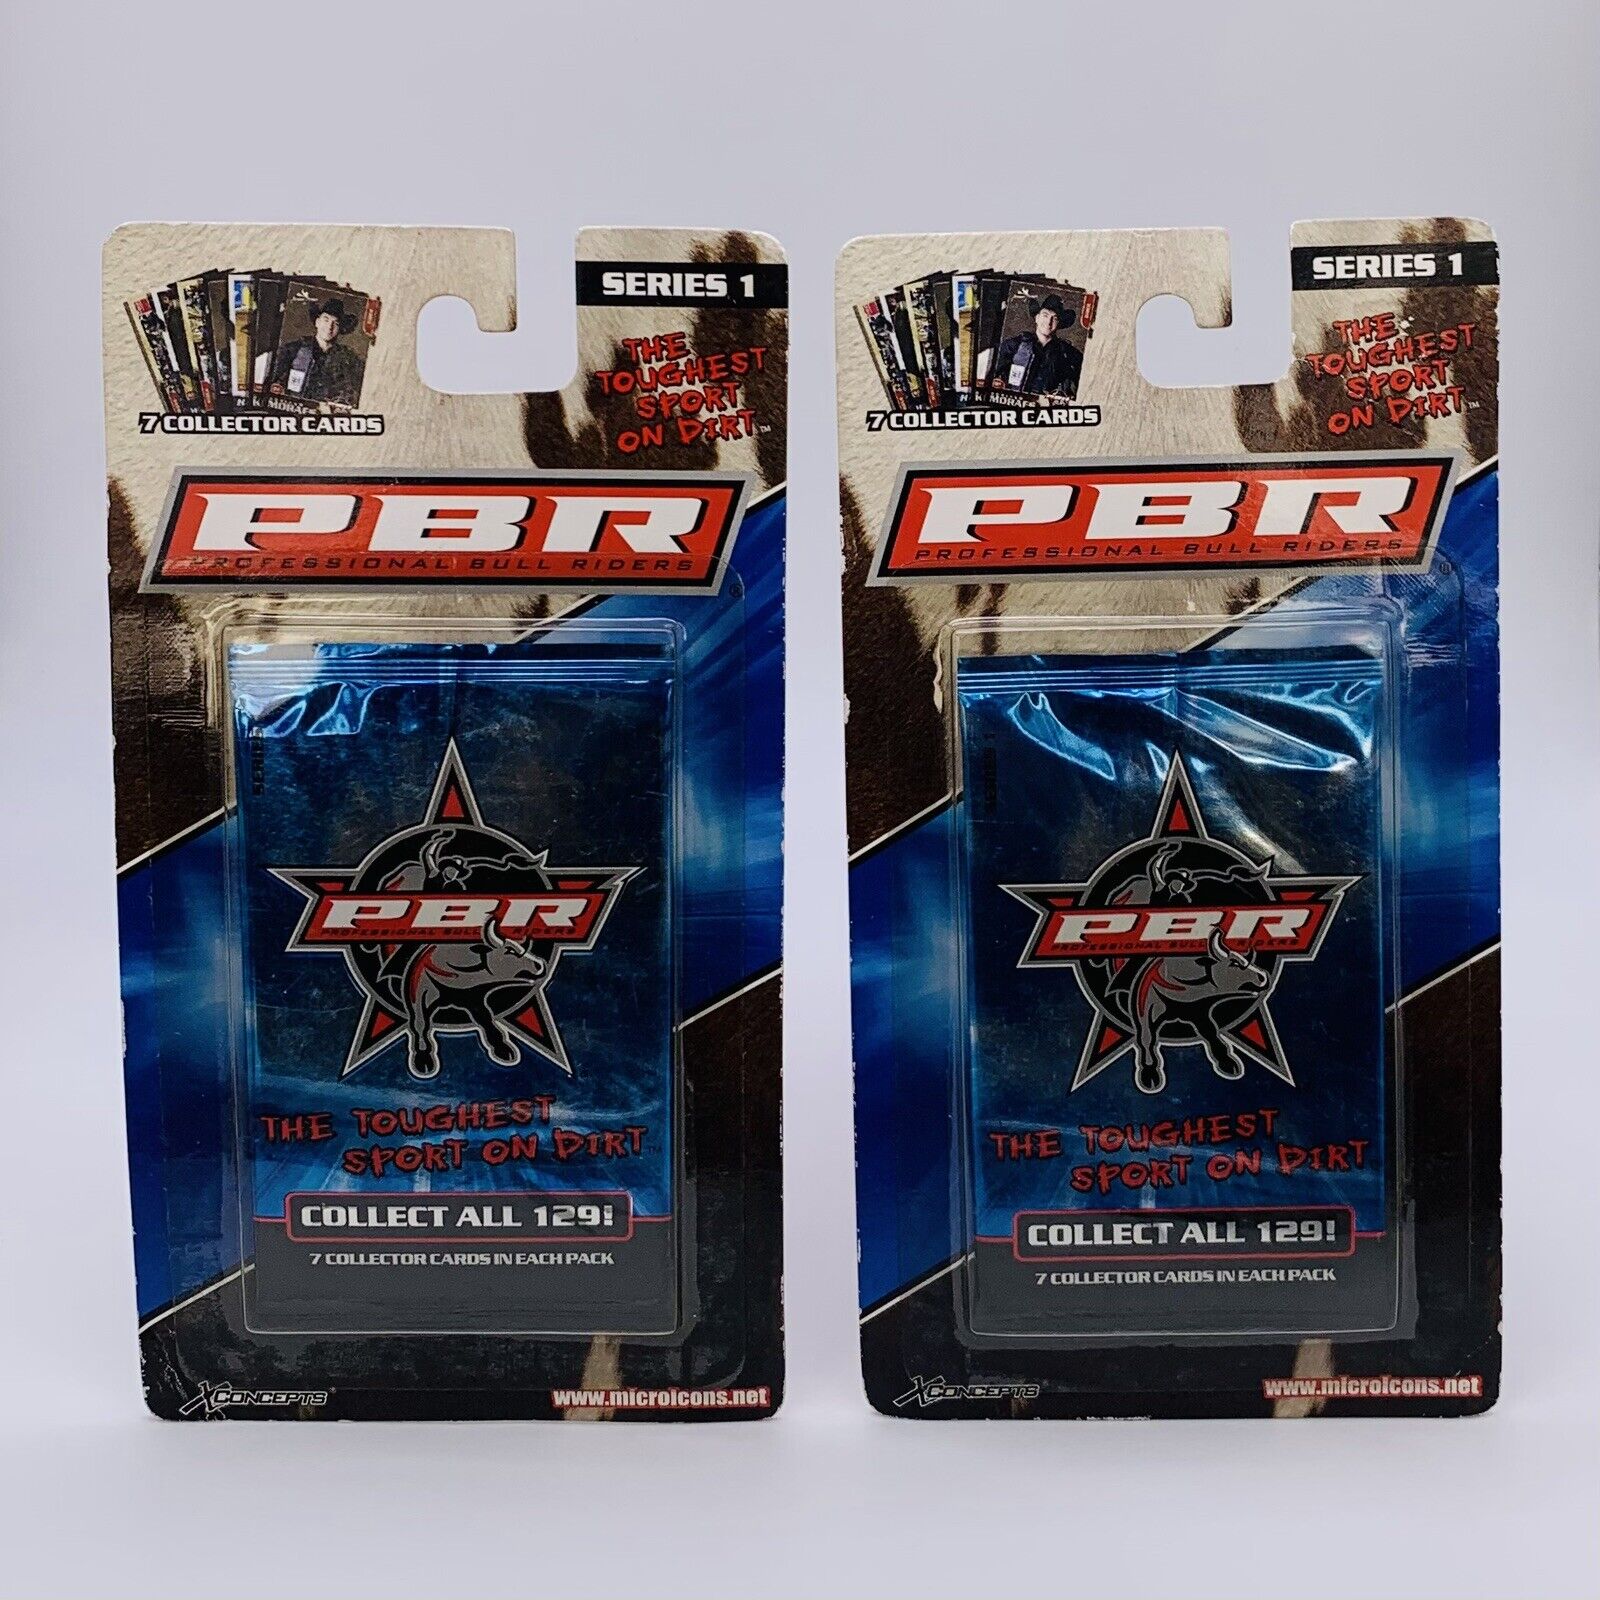 2-Pack X Concepts PBR Professional Bull Riders Series 1 Trading Cards 7 Per Pack